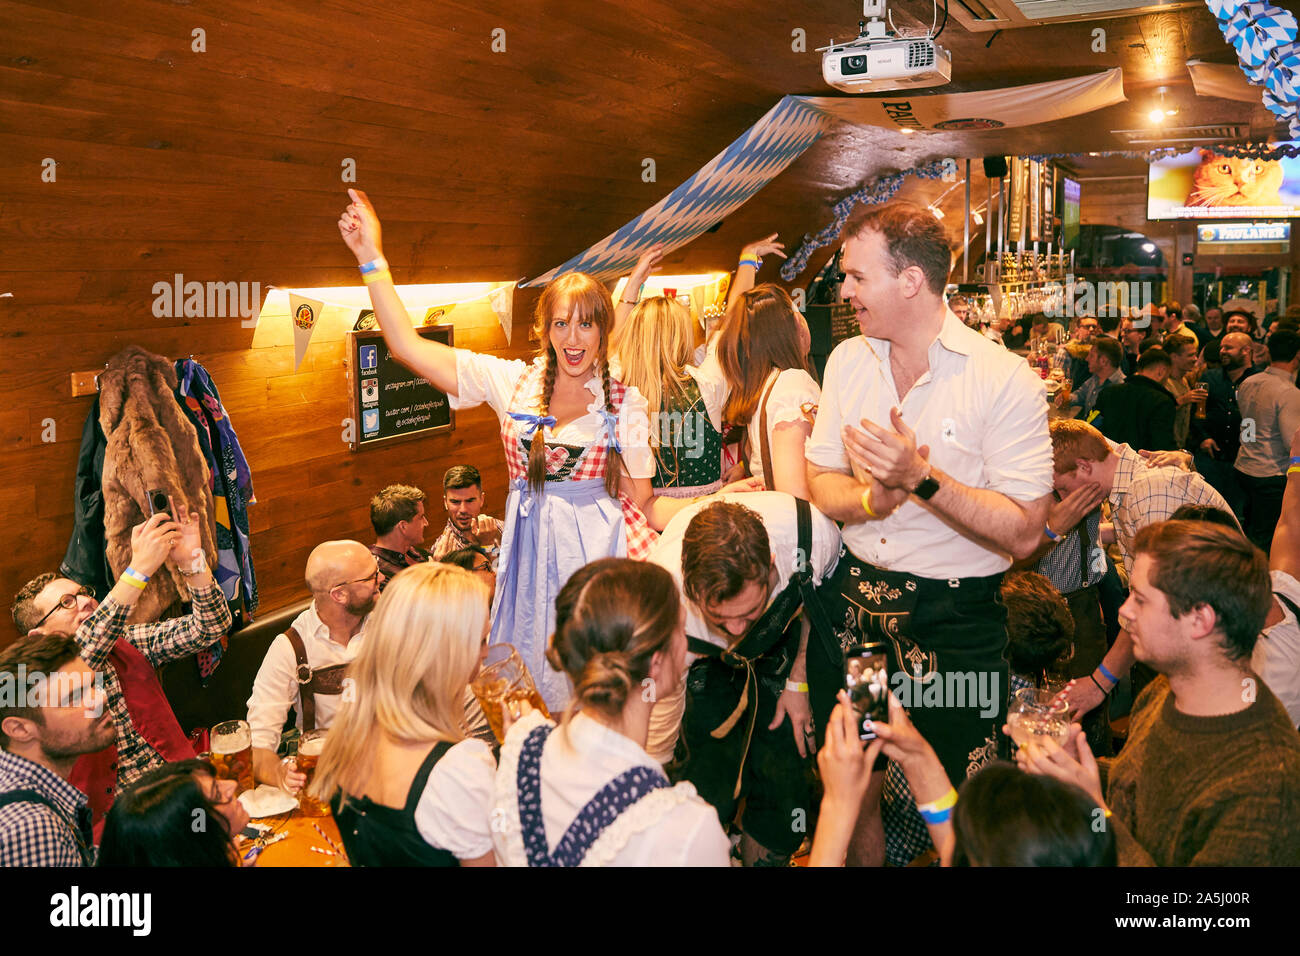 19/10/2019 - On the so-called 'Super Saturday/Super Saturday' all over Europe watched tense after London. A possible decision regarding the current Brexit Treaty in the English parliament was expected. At this very evening, the London 'Oktoberfest Pub' celebrates with joy. Many Germans, but of course especially English drink German beer from the typical 1-liter mass (narrow stone), wear costumes and eat South German cuisine. As at the Oktoberfest stop, only that sometimes a black London taxi or a red bus at the window passes. | usage worldwide Stock Photo